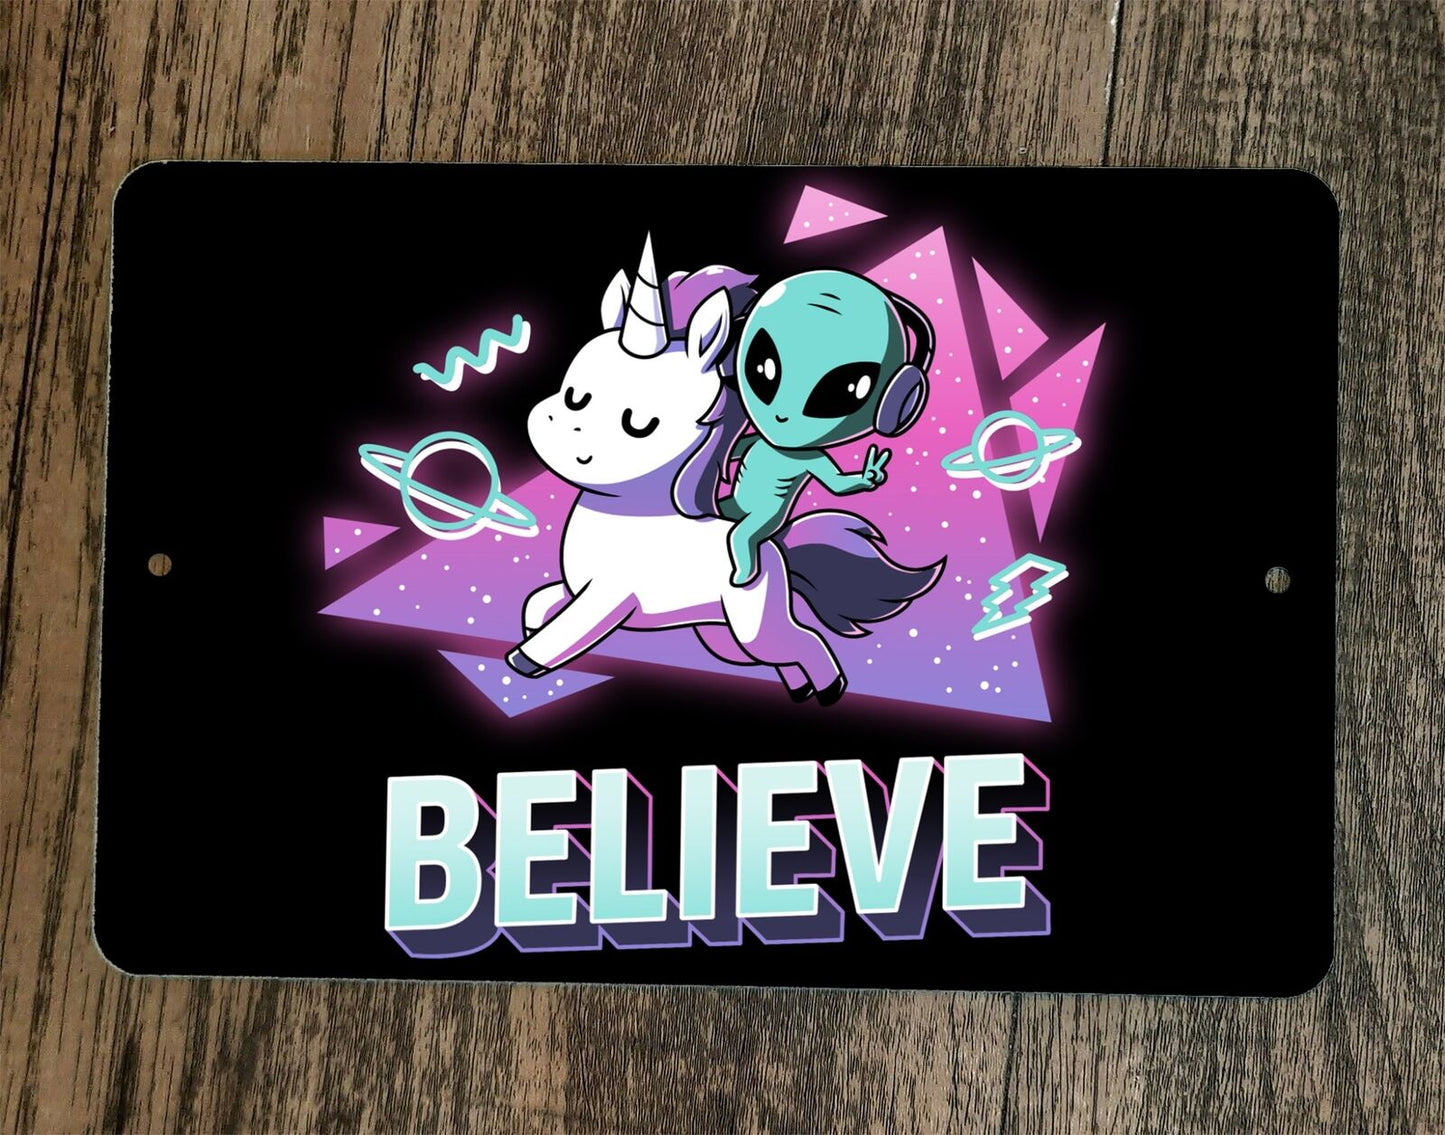 Believe in Unicorns and Aliens 8x12 Metal Wall Sign Poster